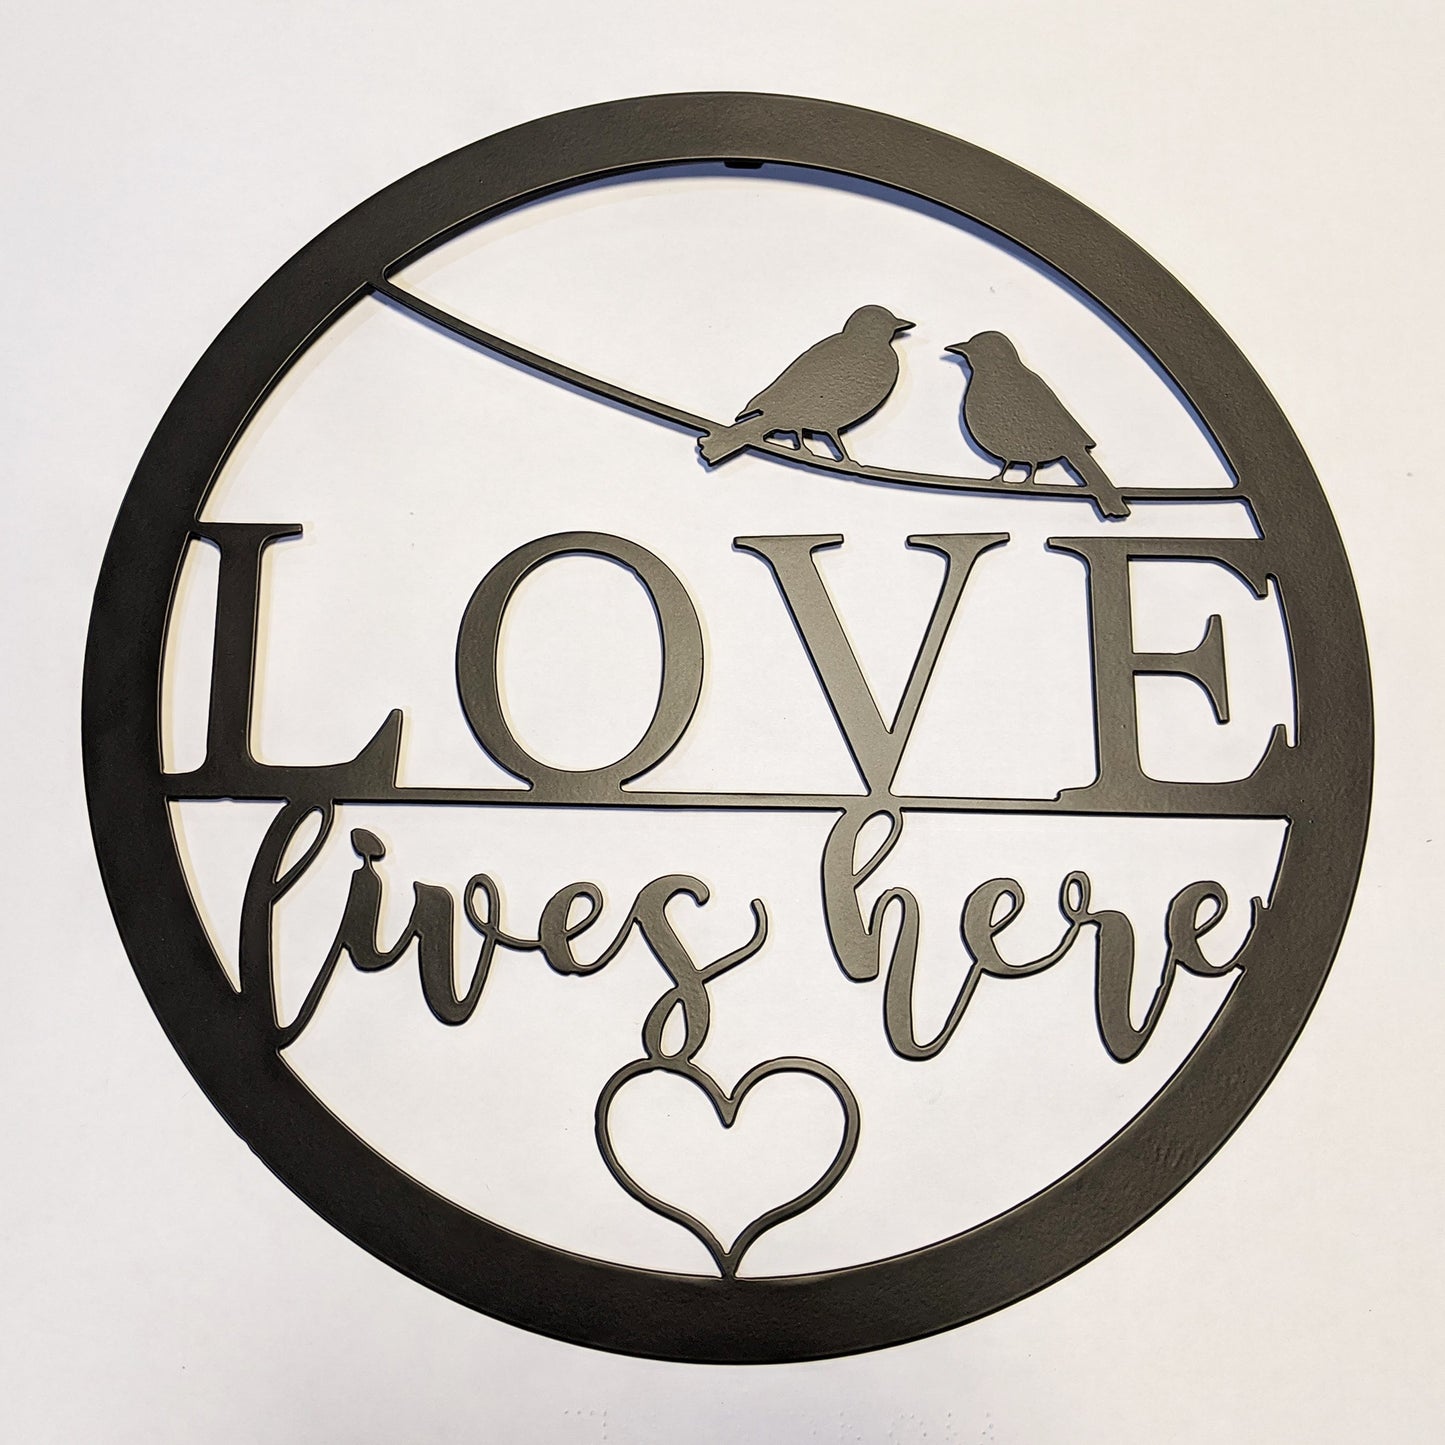 Love Lives Here Sign